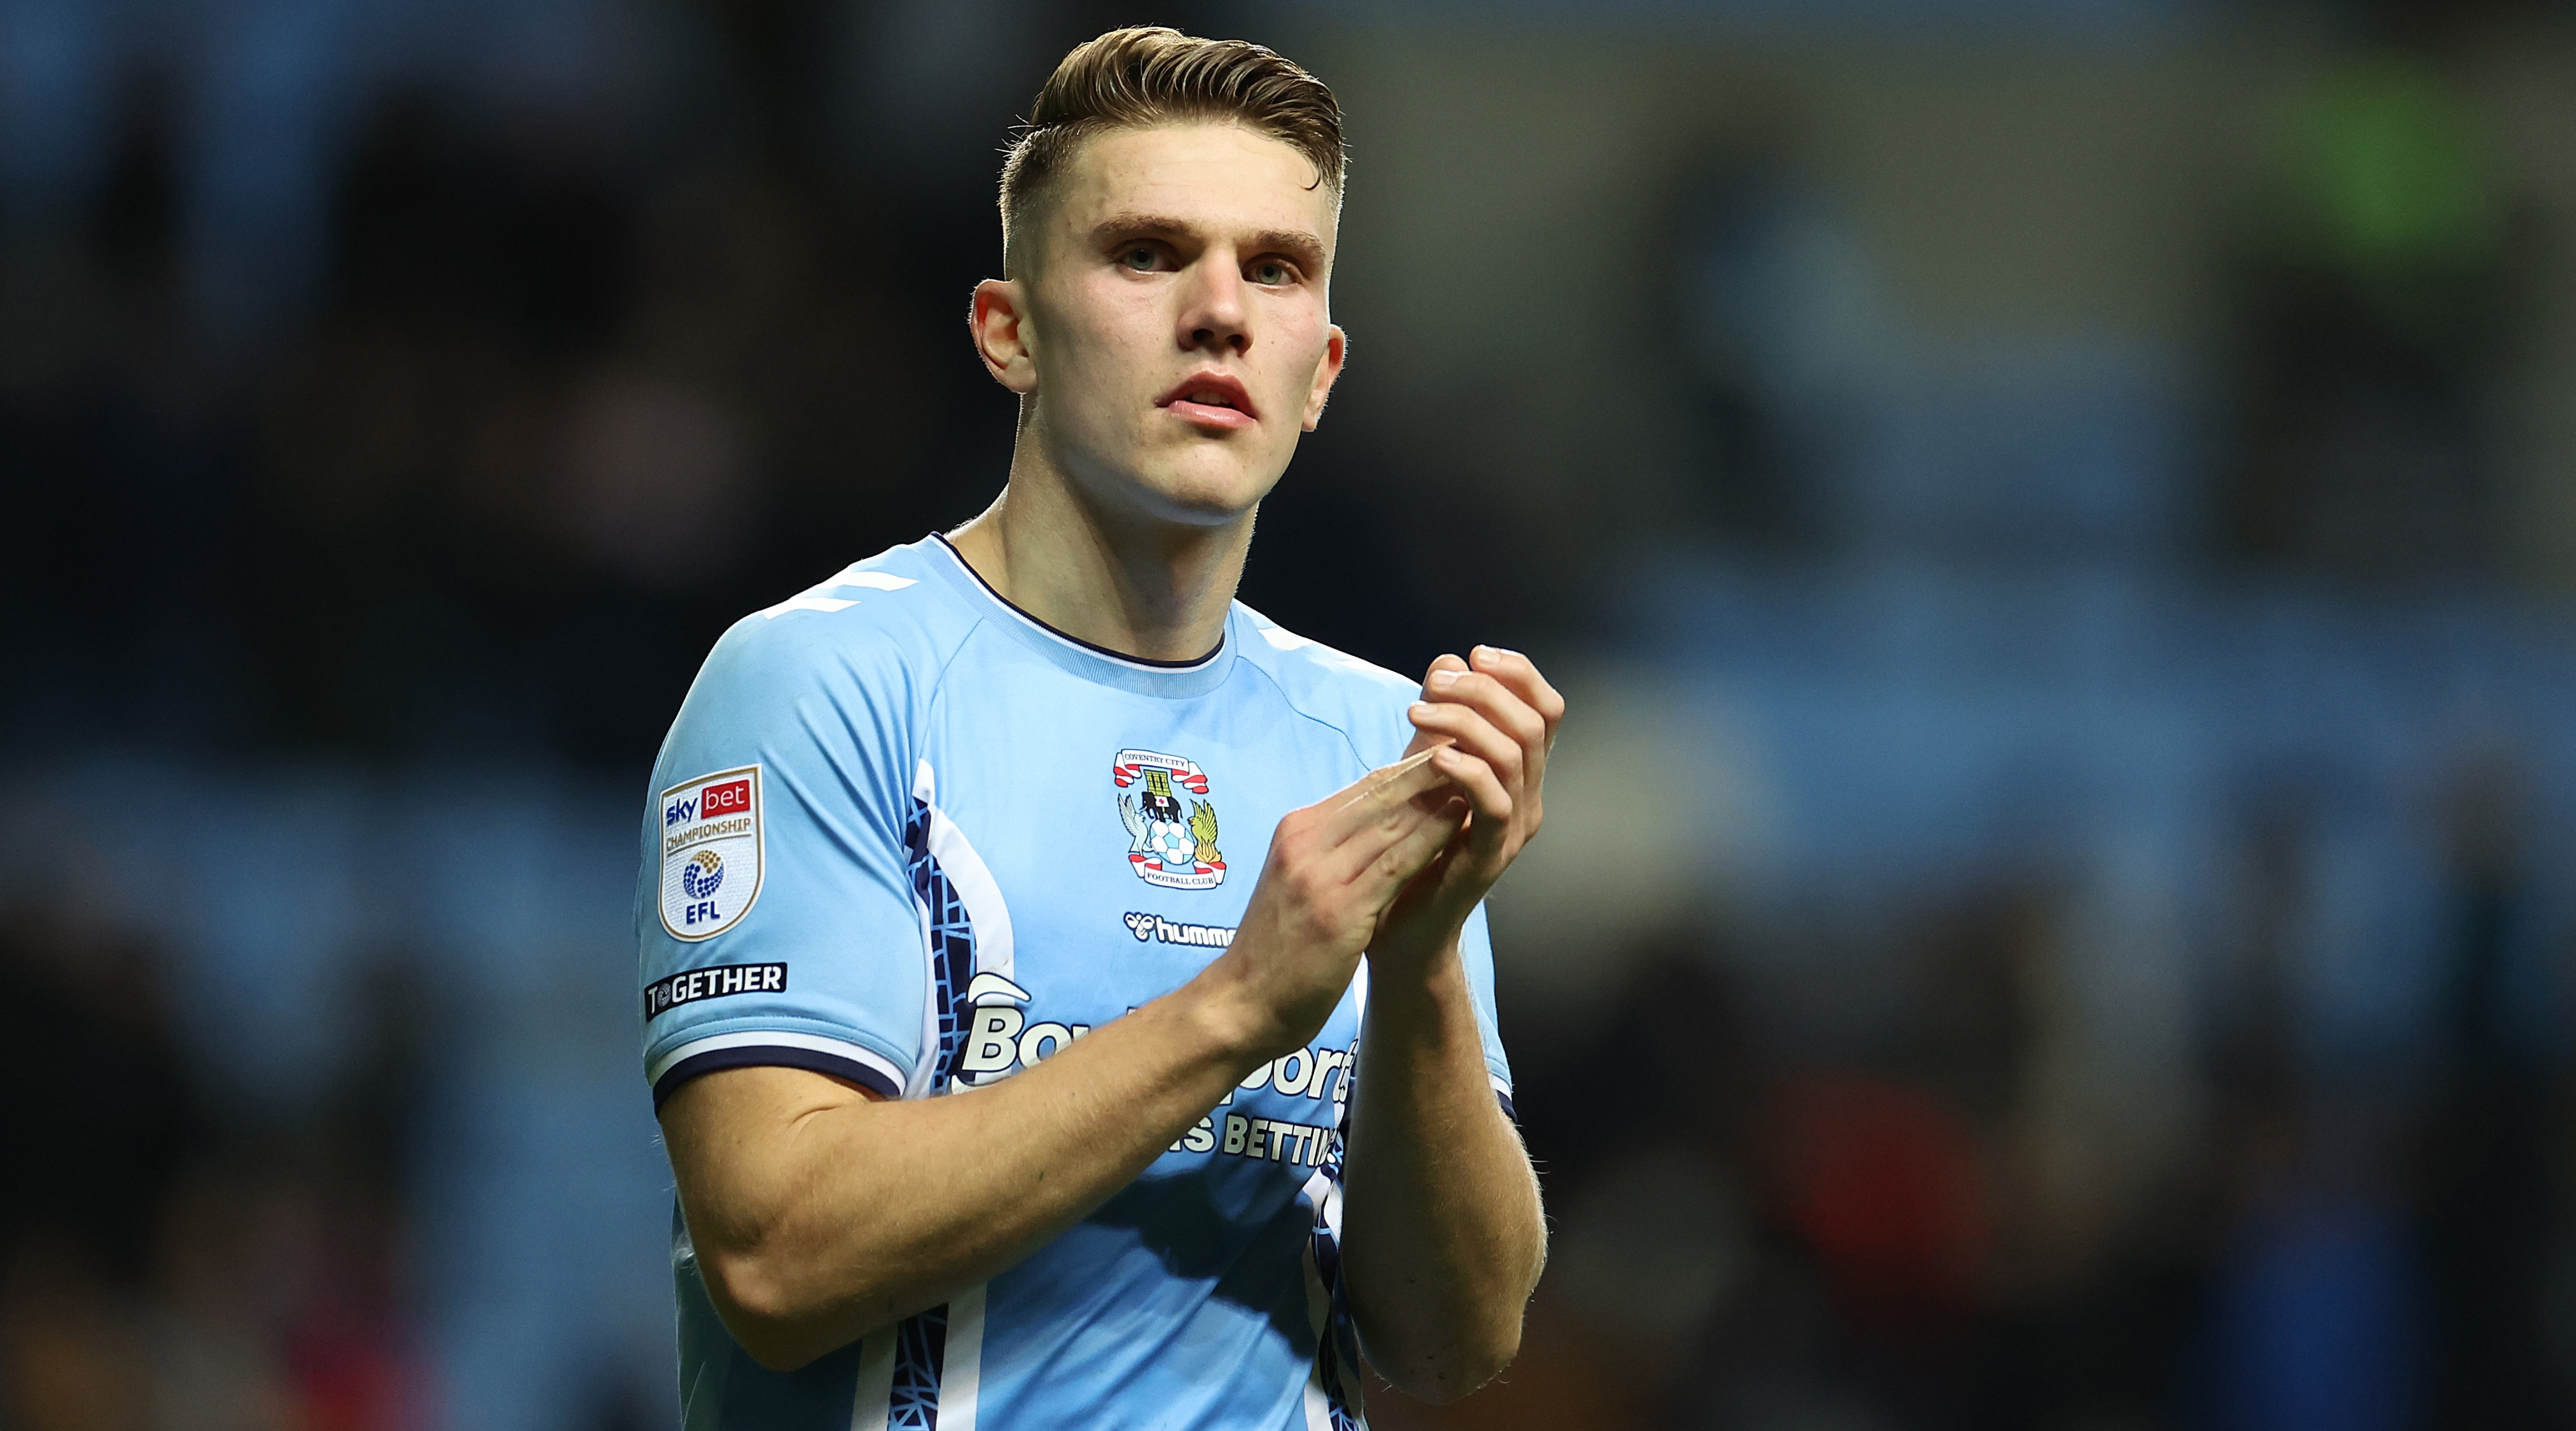 Coventry City vs Luton Town live stream, match preview, team news and kick-off time for the Championship play-off final FourFourTwo